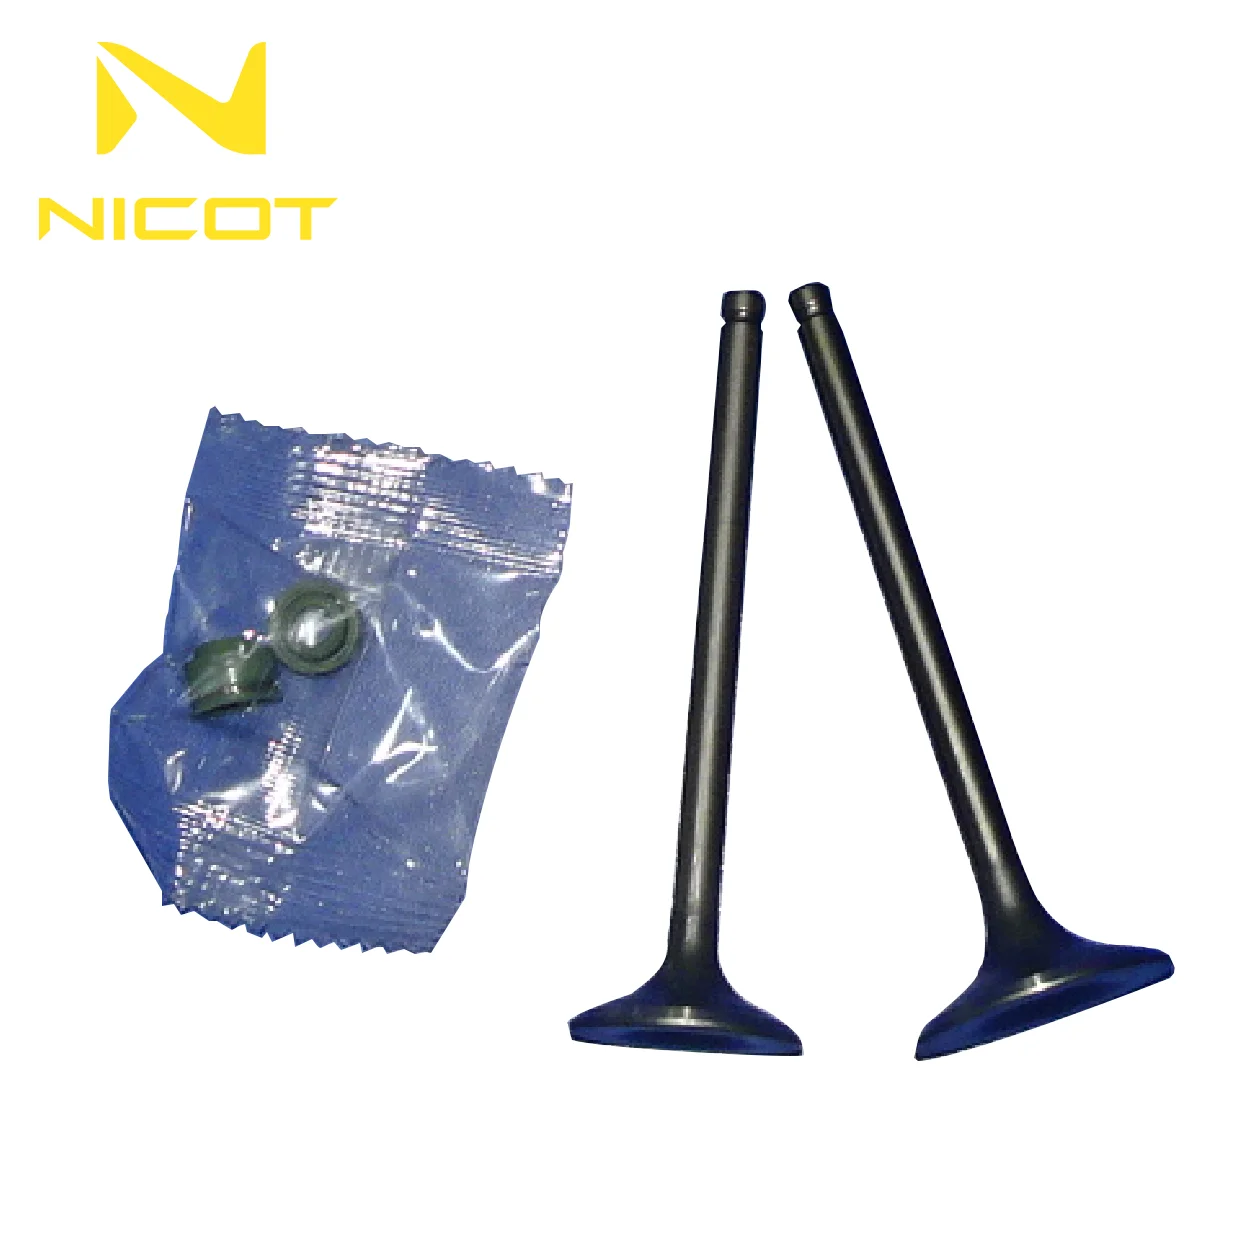 Nicot Best Selling Good Quality Motorcycle Spare Parts Motorcycle Valve For Inlet Outlet Valve